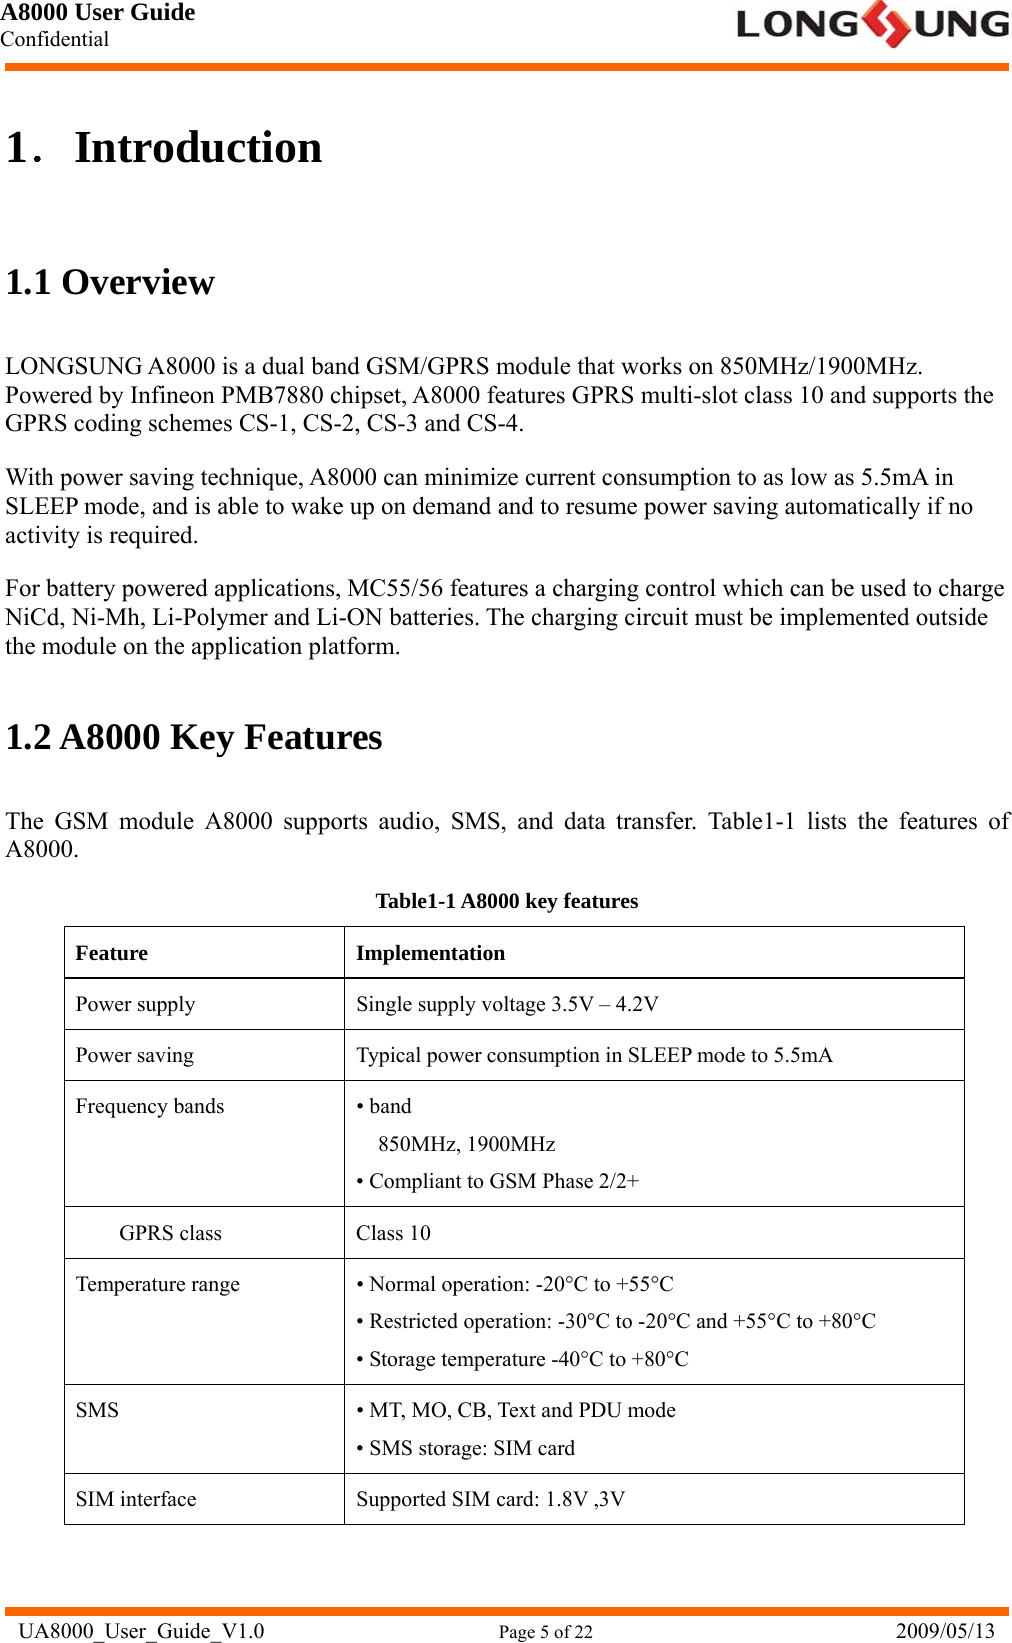 A8000 User Guide Confidential   UA8000_User_Guide_V1.0                      Page 5 of 22                            2009/05/13 1．Introduction 1.1 Overview LONGSUNG A8000 is a dual band GSM/GPRS module that works on 850MHz/1900MHz. Powered by Infineon PMB7880 chipset, A8000 features GPRS multi-slot class 10 and supports the GPRS coding schemes CS-1, CS-2, CS-3 and CS-4. With power saving technique, A8000 can minimize current consumption to as low as 5.5mA in SLEEP mode, and is able to wake up on demand and to resume power saving automatically if no activity is required. For battery powered applications, MC55/56 features a charging control which can be used to charge NiCd, Ni-Mh, Li-Polymer and Li-ON batteries. The charging circuit must be implemented outside the module on the application platform. 1.2 A8000 Key Features The GSM module A8000 supports audio, SMS, and data transfer. Table1-1 lists the features of A8000. Table1-1 A8000 key features Feature Implementation Power supply  Single supply voltage 3.5V – 4.2V Power saving  Typical power consumption in SLEEP mode to 5.5mA Frequency bands  • band 850MHz, 1900MHz • Compliant to GSM Phase 2/2+ GPRS class  Class 10 Temperature range  • Normal operation: -20°C to +55°C   • Restricted operation: -30°C to -20°C and +55°C to +80°C   • Storage temperature -40°C to +80°C   SMS  • MT, MO, CB, Text and PDU mode • SMS storage: SIM card SIM interface  Supported SIM card: 1.8V ,3V 